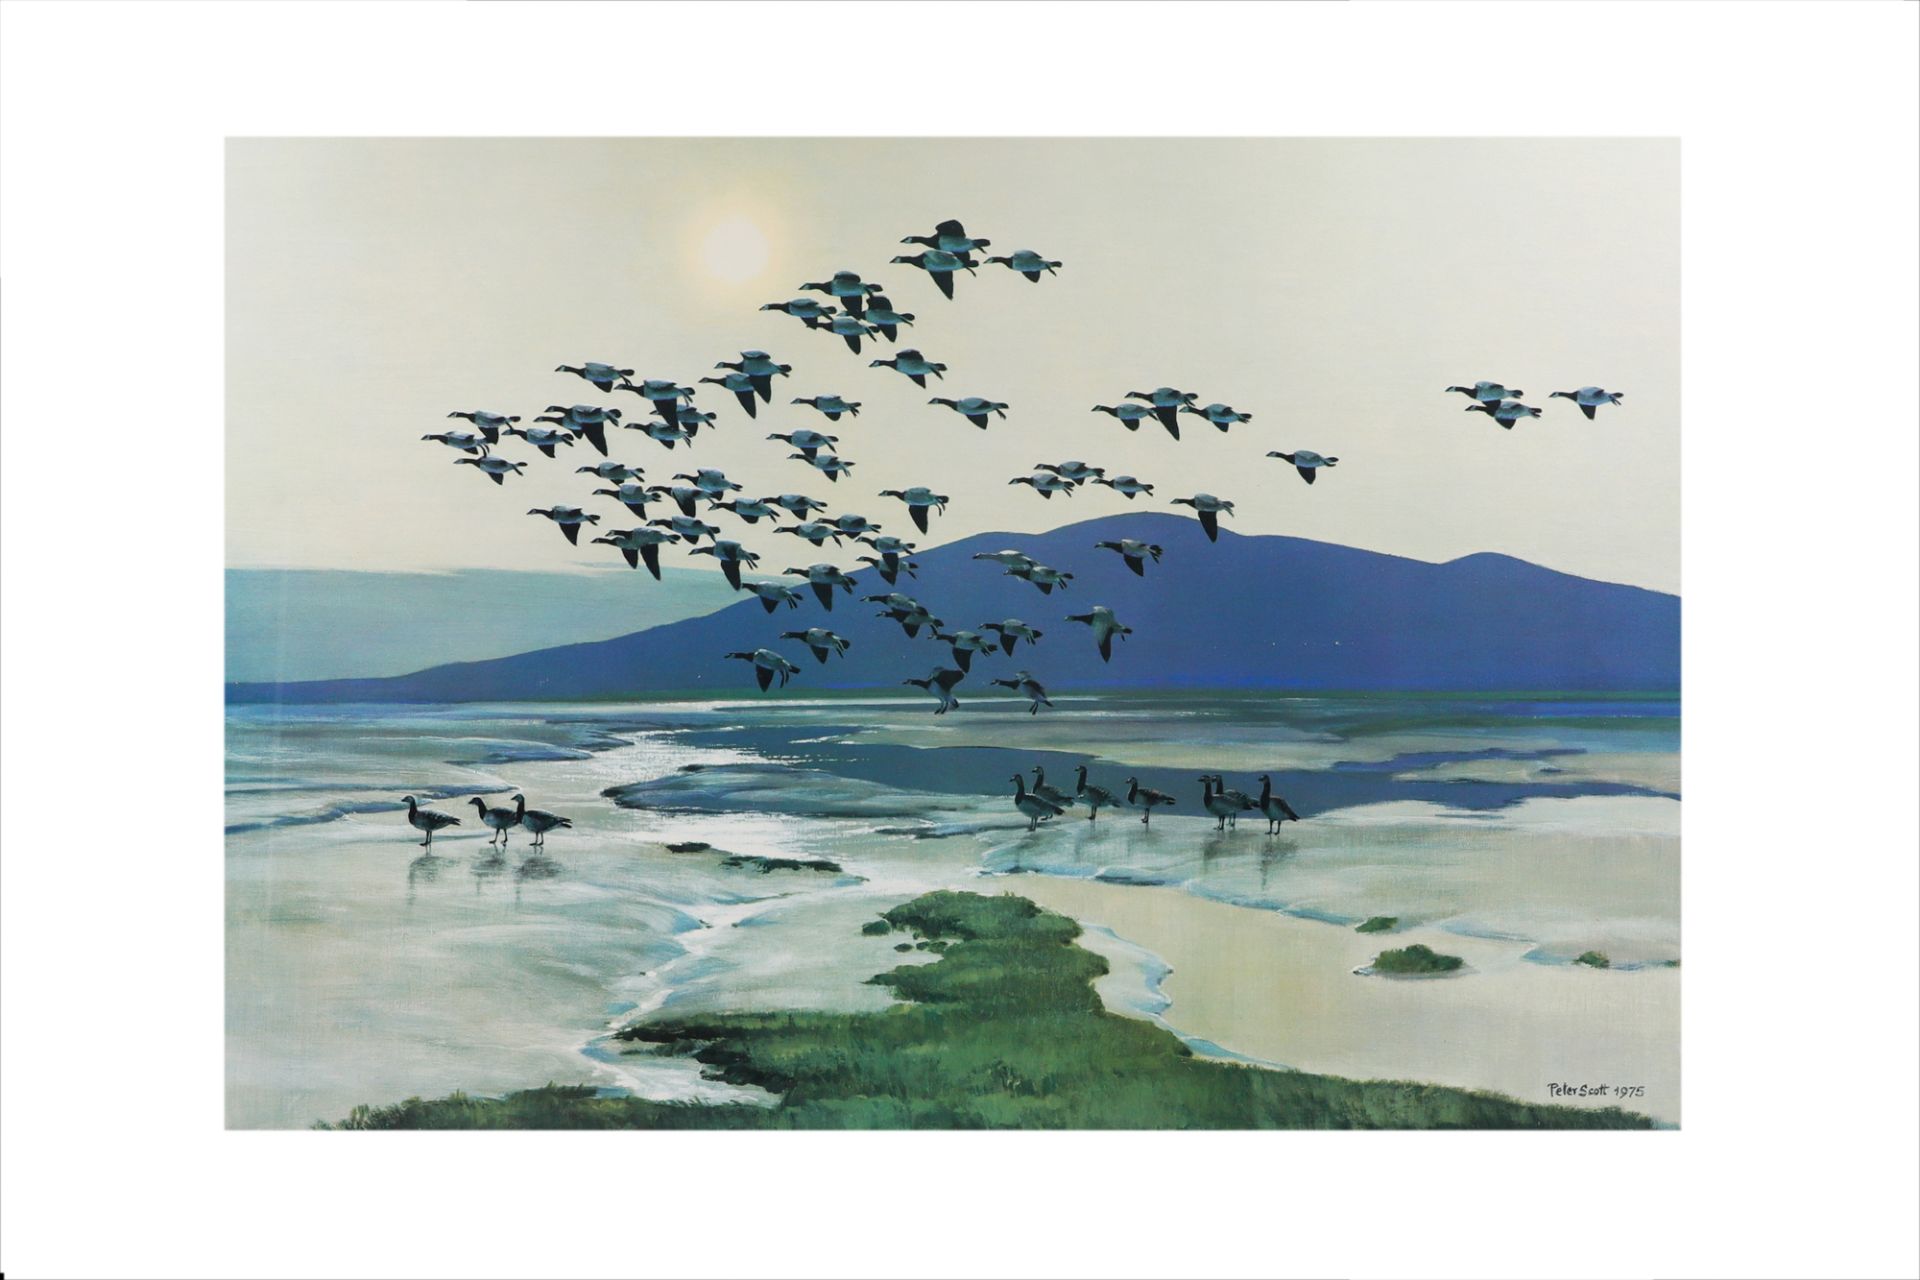 AFTER SIR PETER SCOTT (1909-89), 'Geese on shoreline, 1975', limited edition repro print, 40 x 55